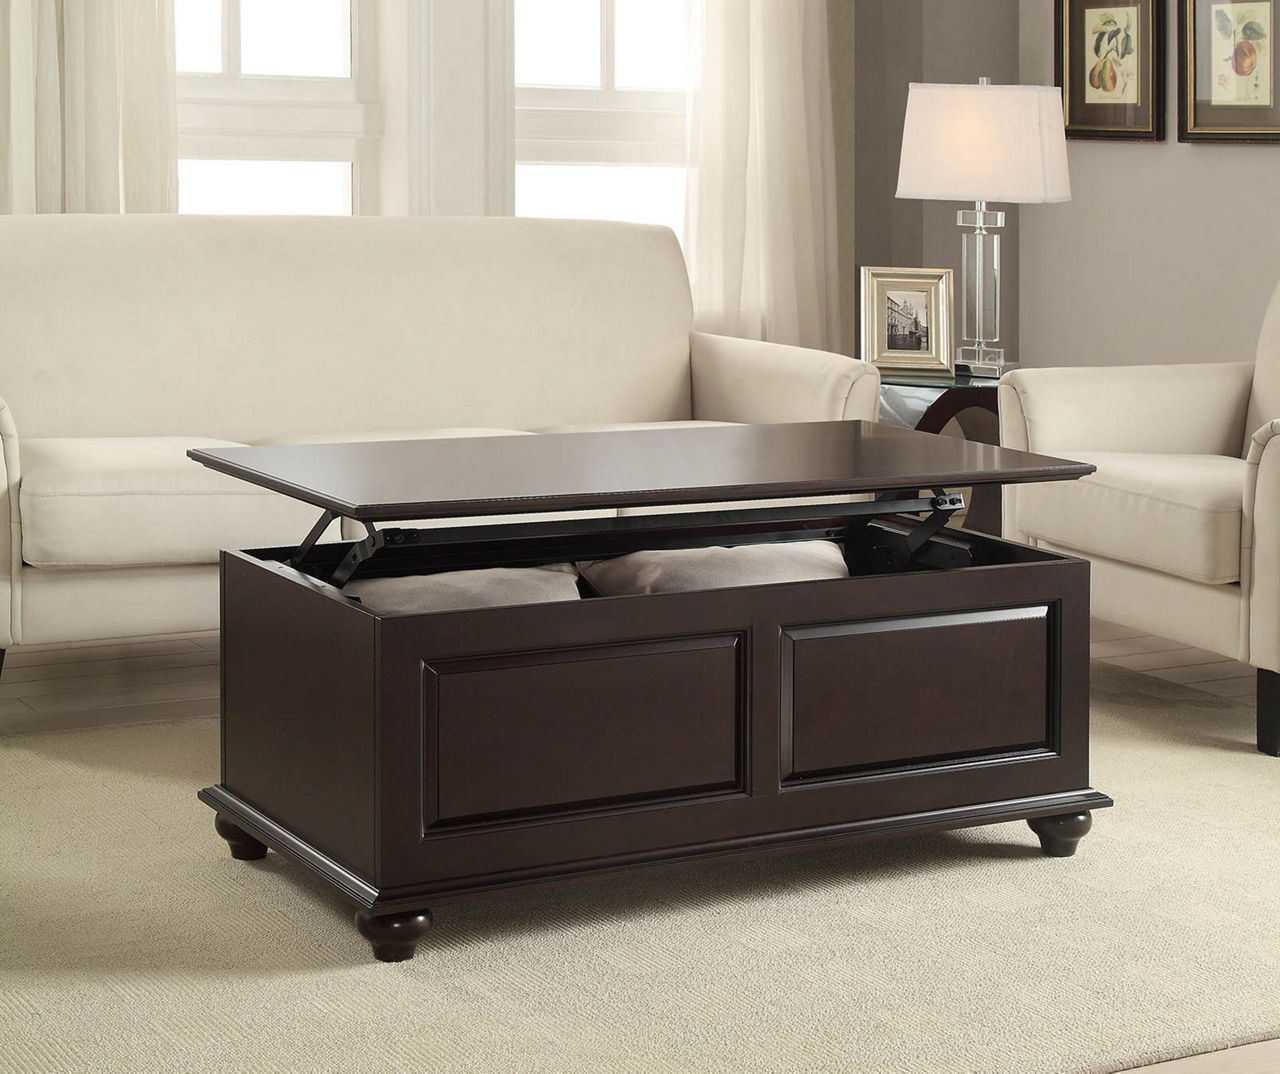 Lift Up Coffee Table Big Lots